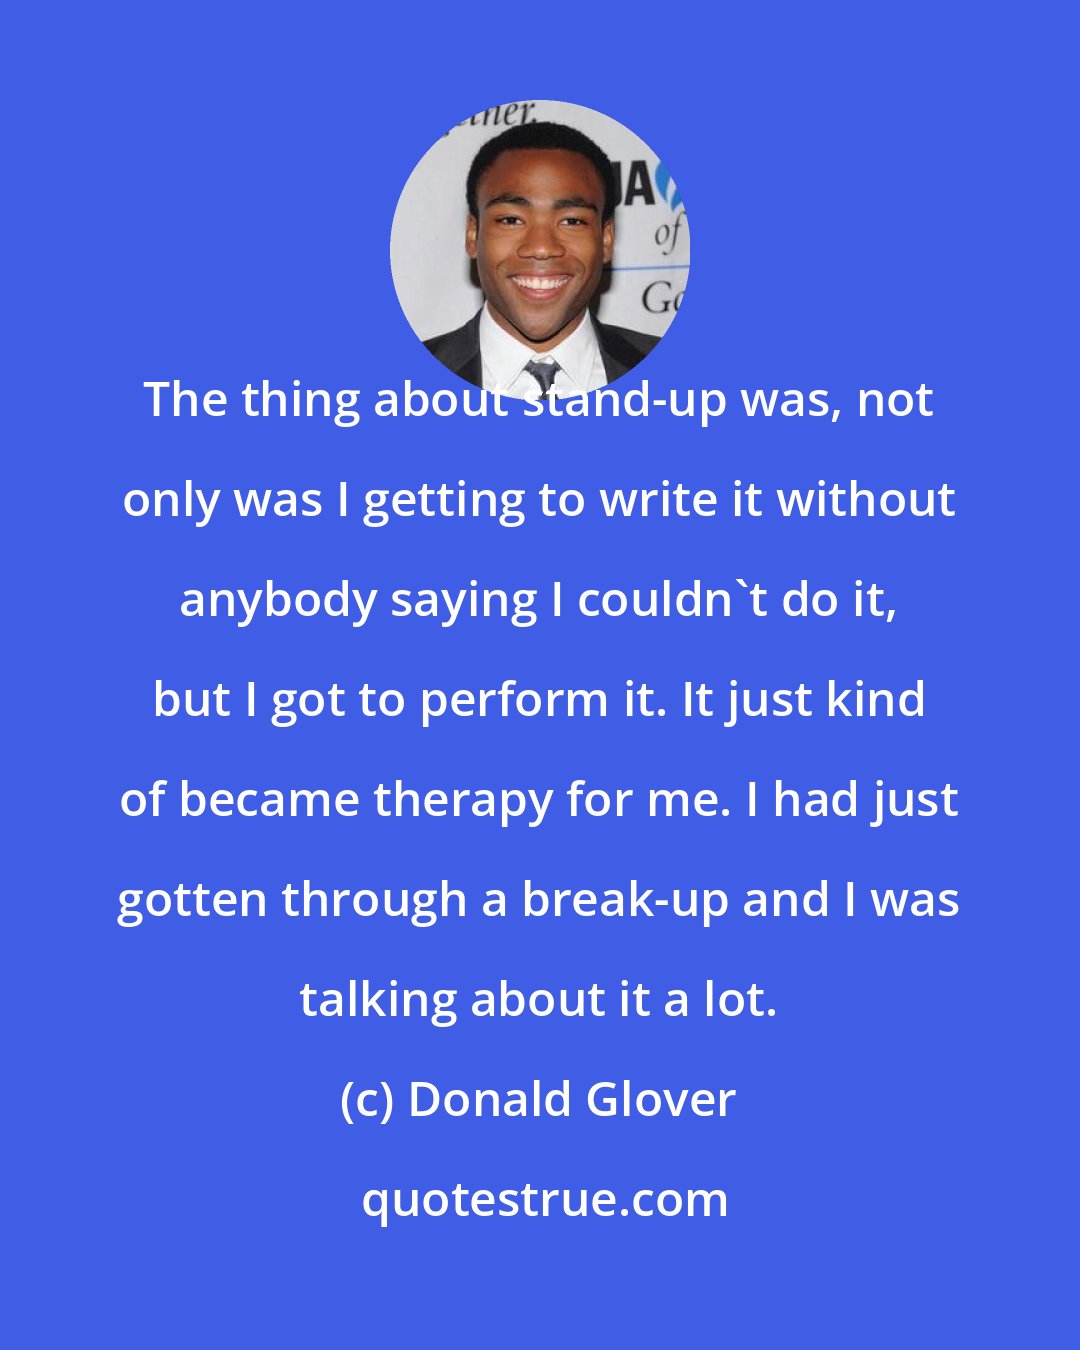 Donald Glover: The thing about stand-up was, not only was I getting to write it without anybody saying I couldn't do it, but I got to perform it. It just kind of became therapy for me. I had just gotten through a break-up and I was talking about it a lot.